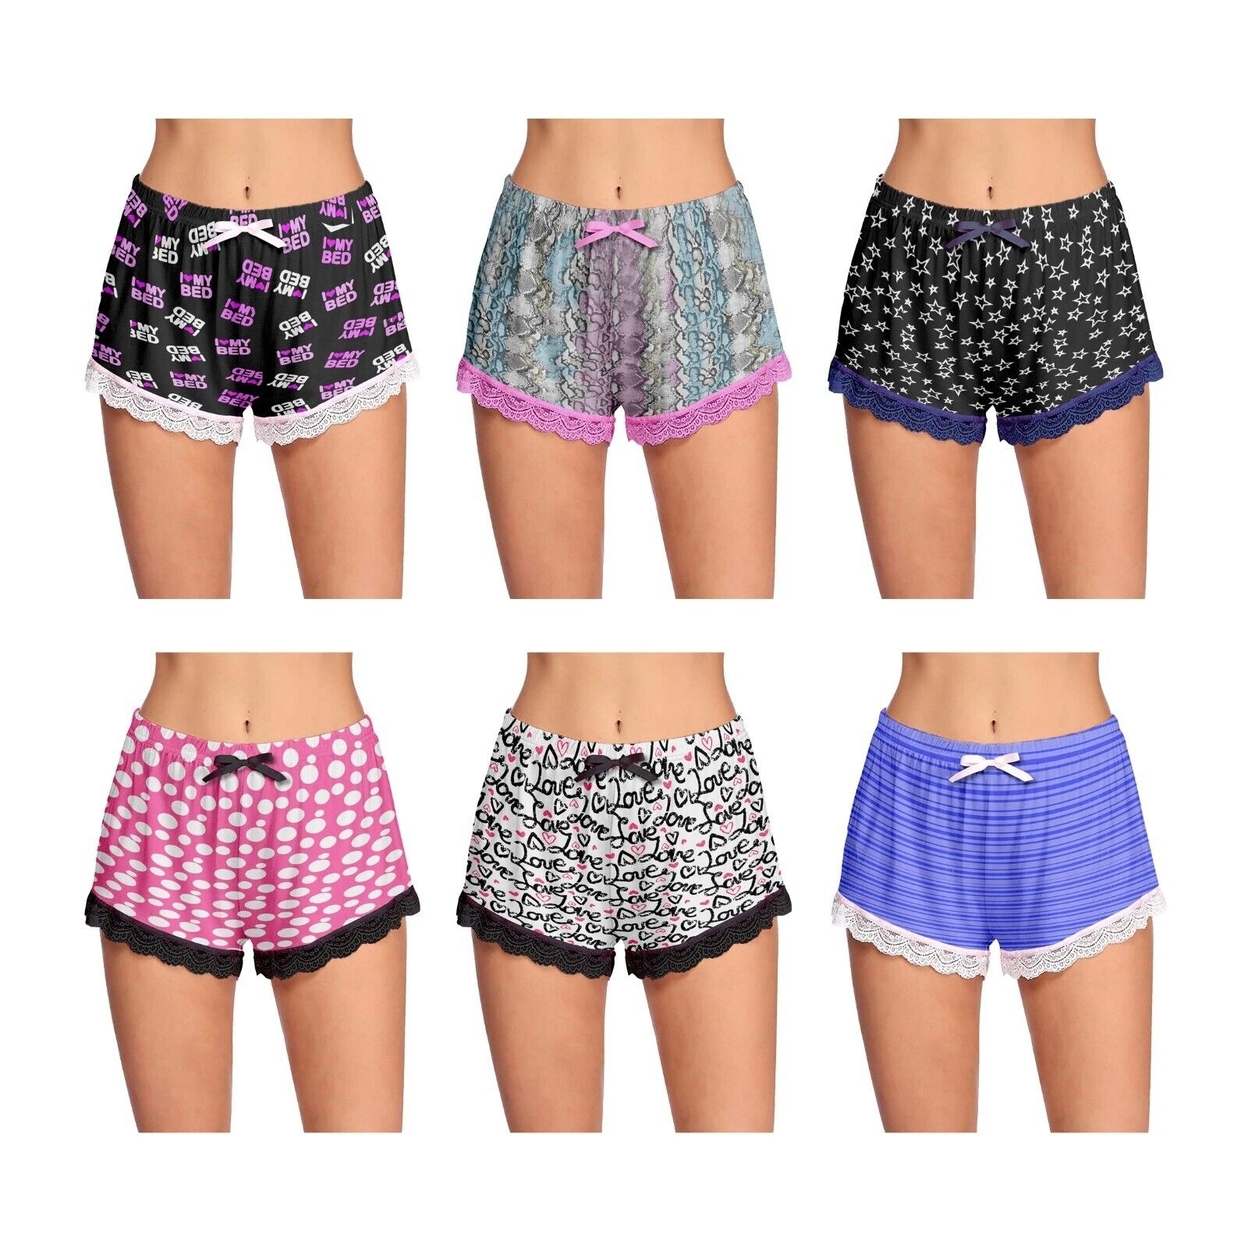 2-Pack: Women's Ultra-Soft Cozy Fun Printed Lace Trim Pajama Lounge Shorts - Small, Love